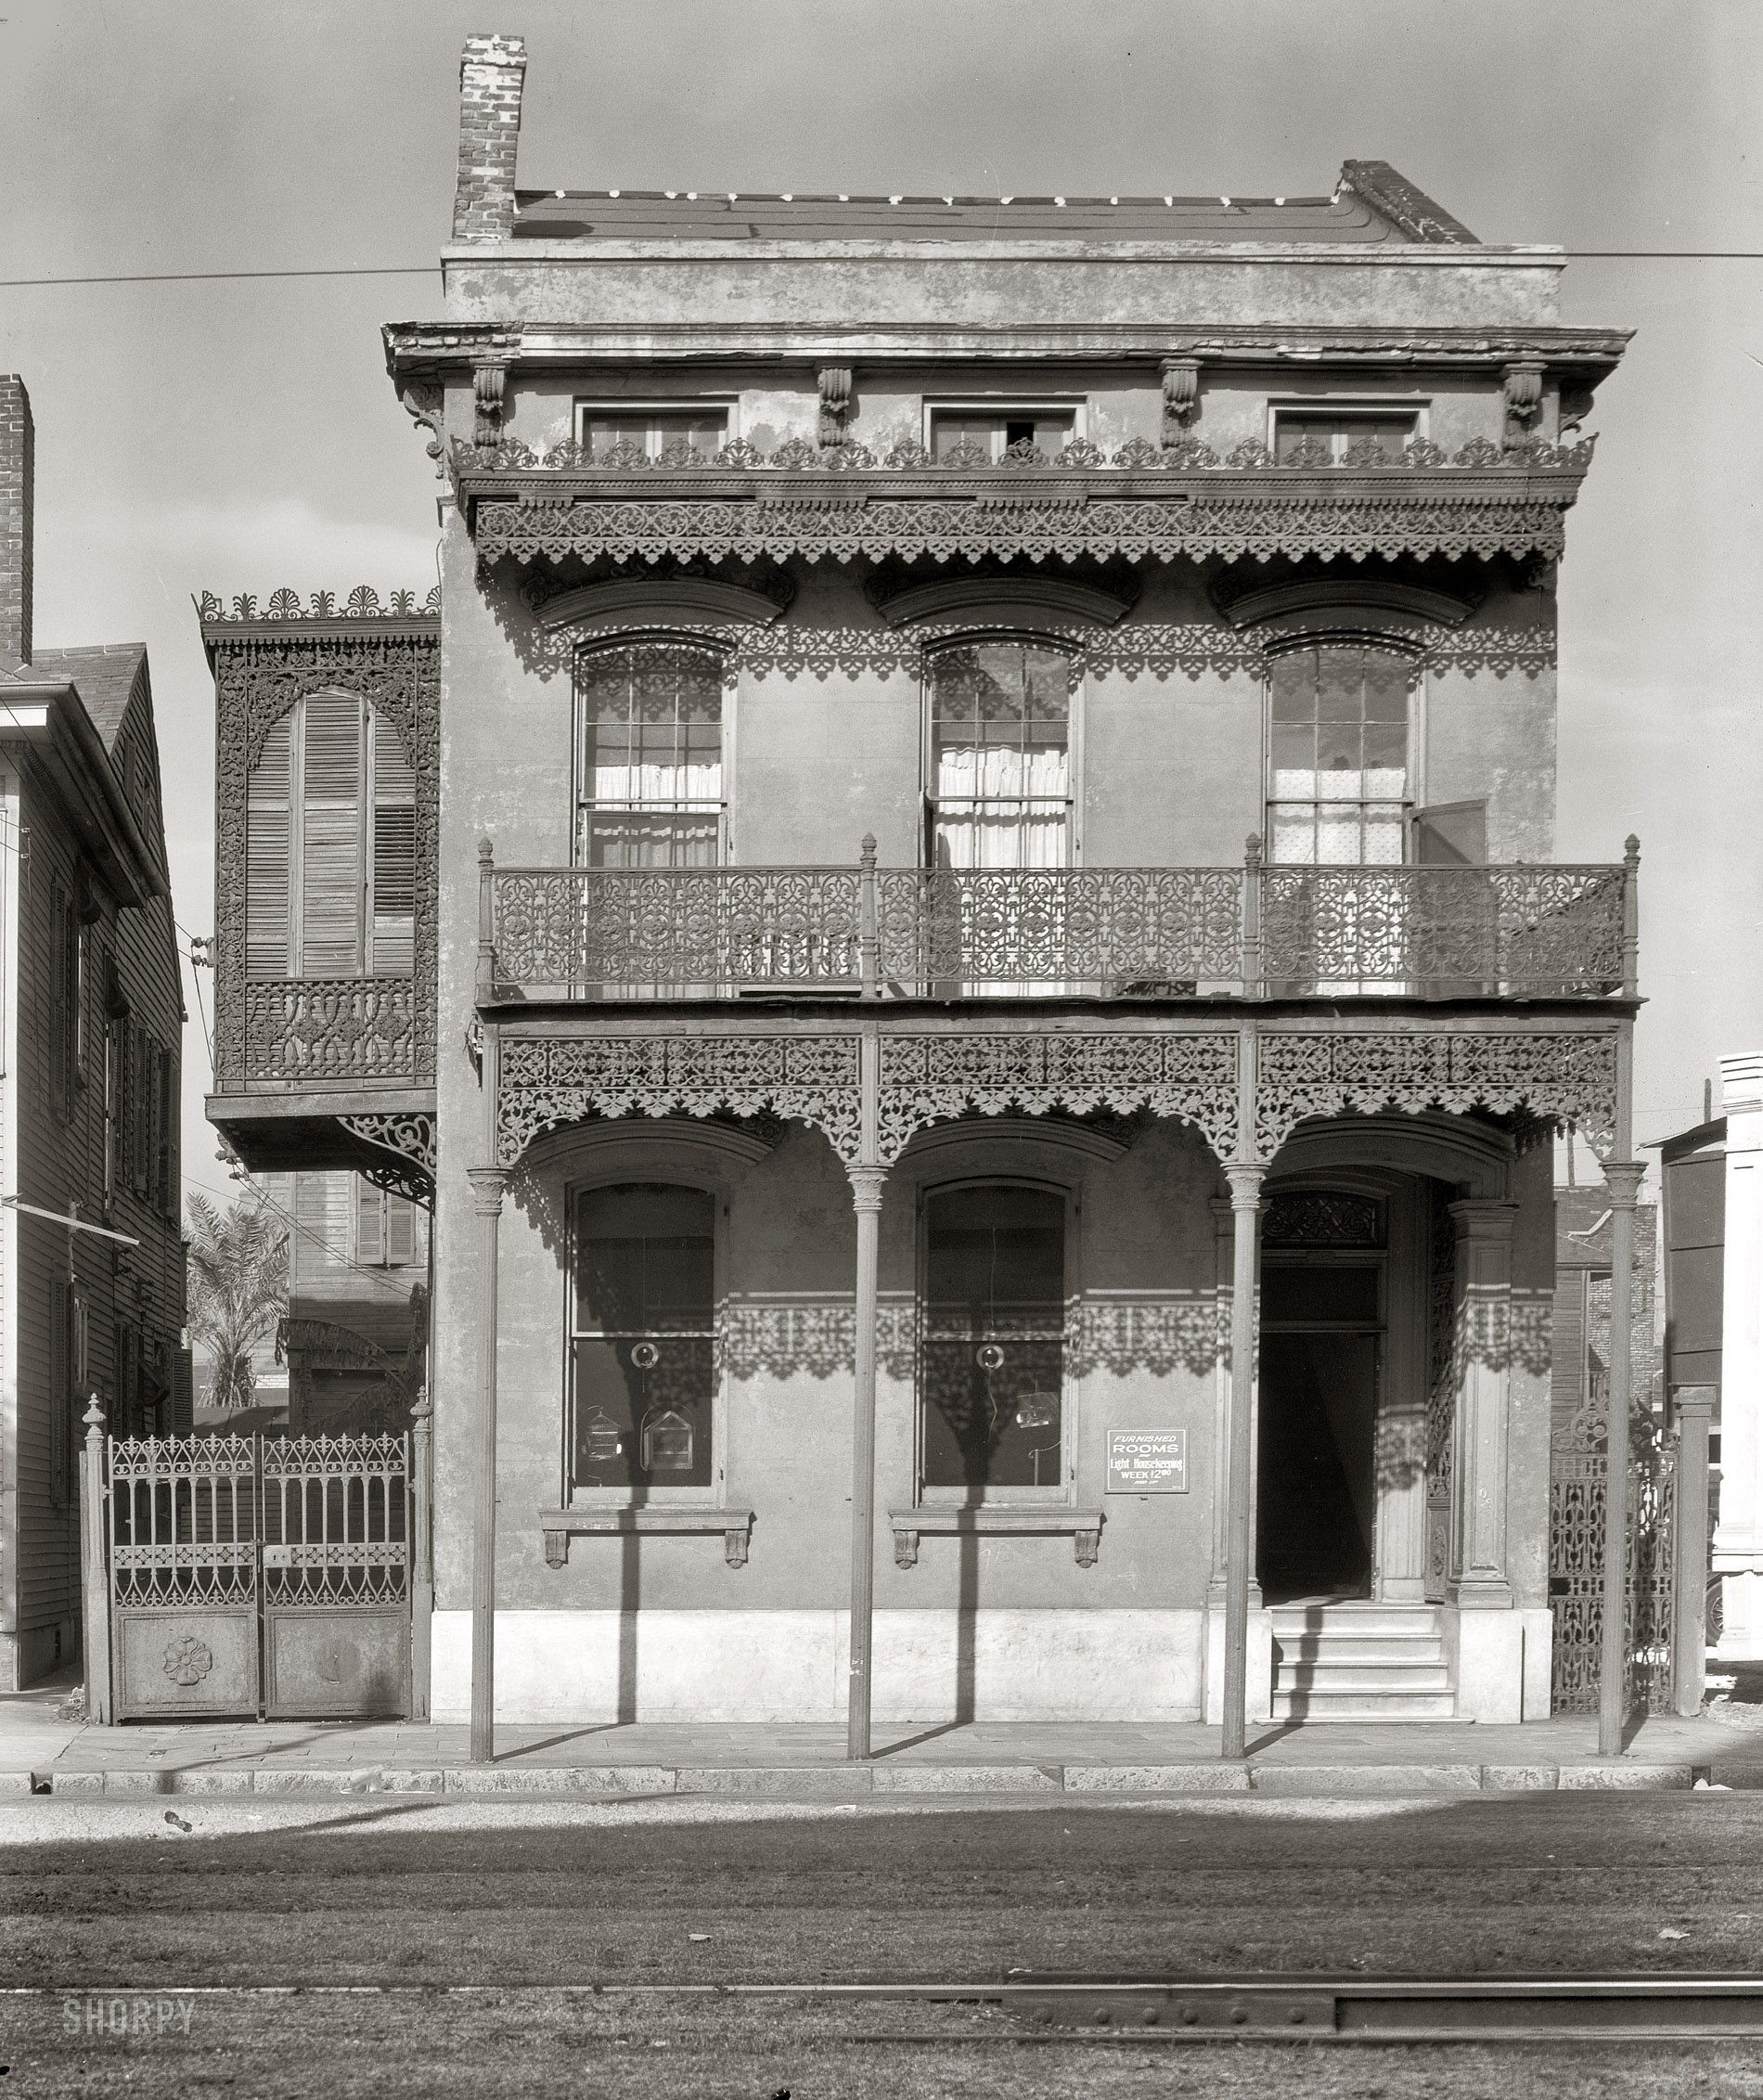 January 1936. "New Orleans architecture. Cast-iron grillwork house near Lee Circle on Saint Charles Avenue." Large-format nitrate negative by Walker Evans for the Farm Security Administration. View full size.  